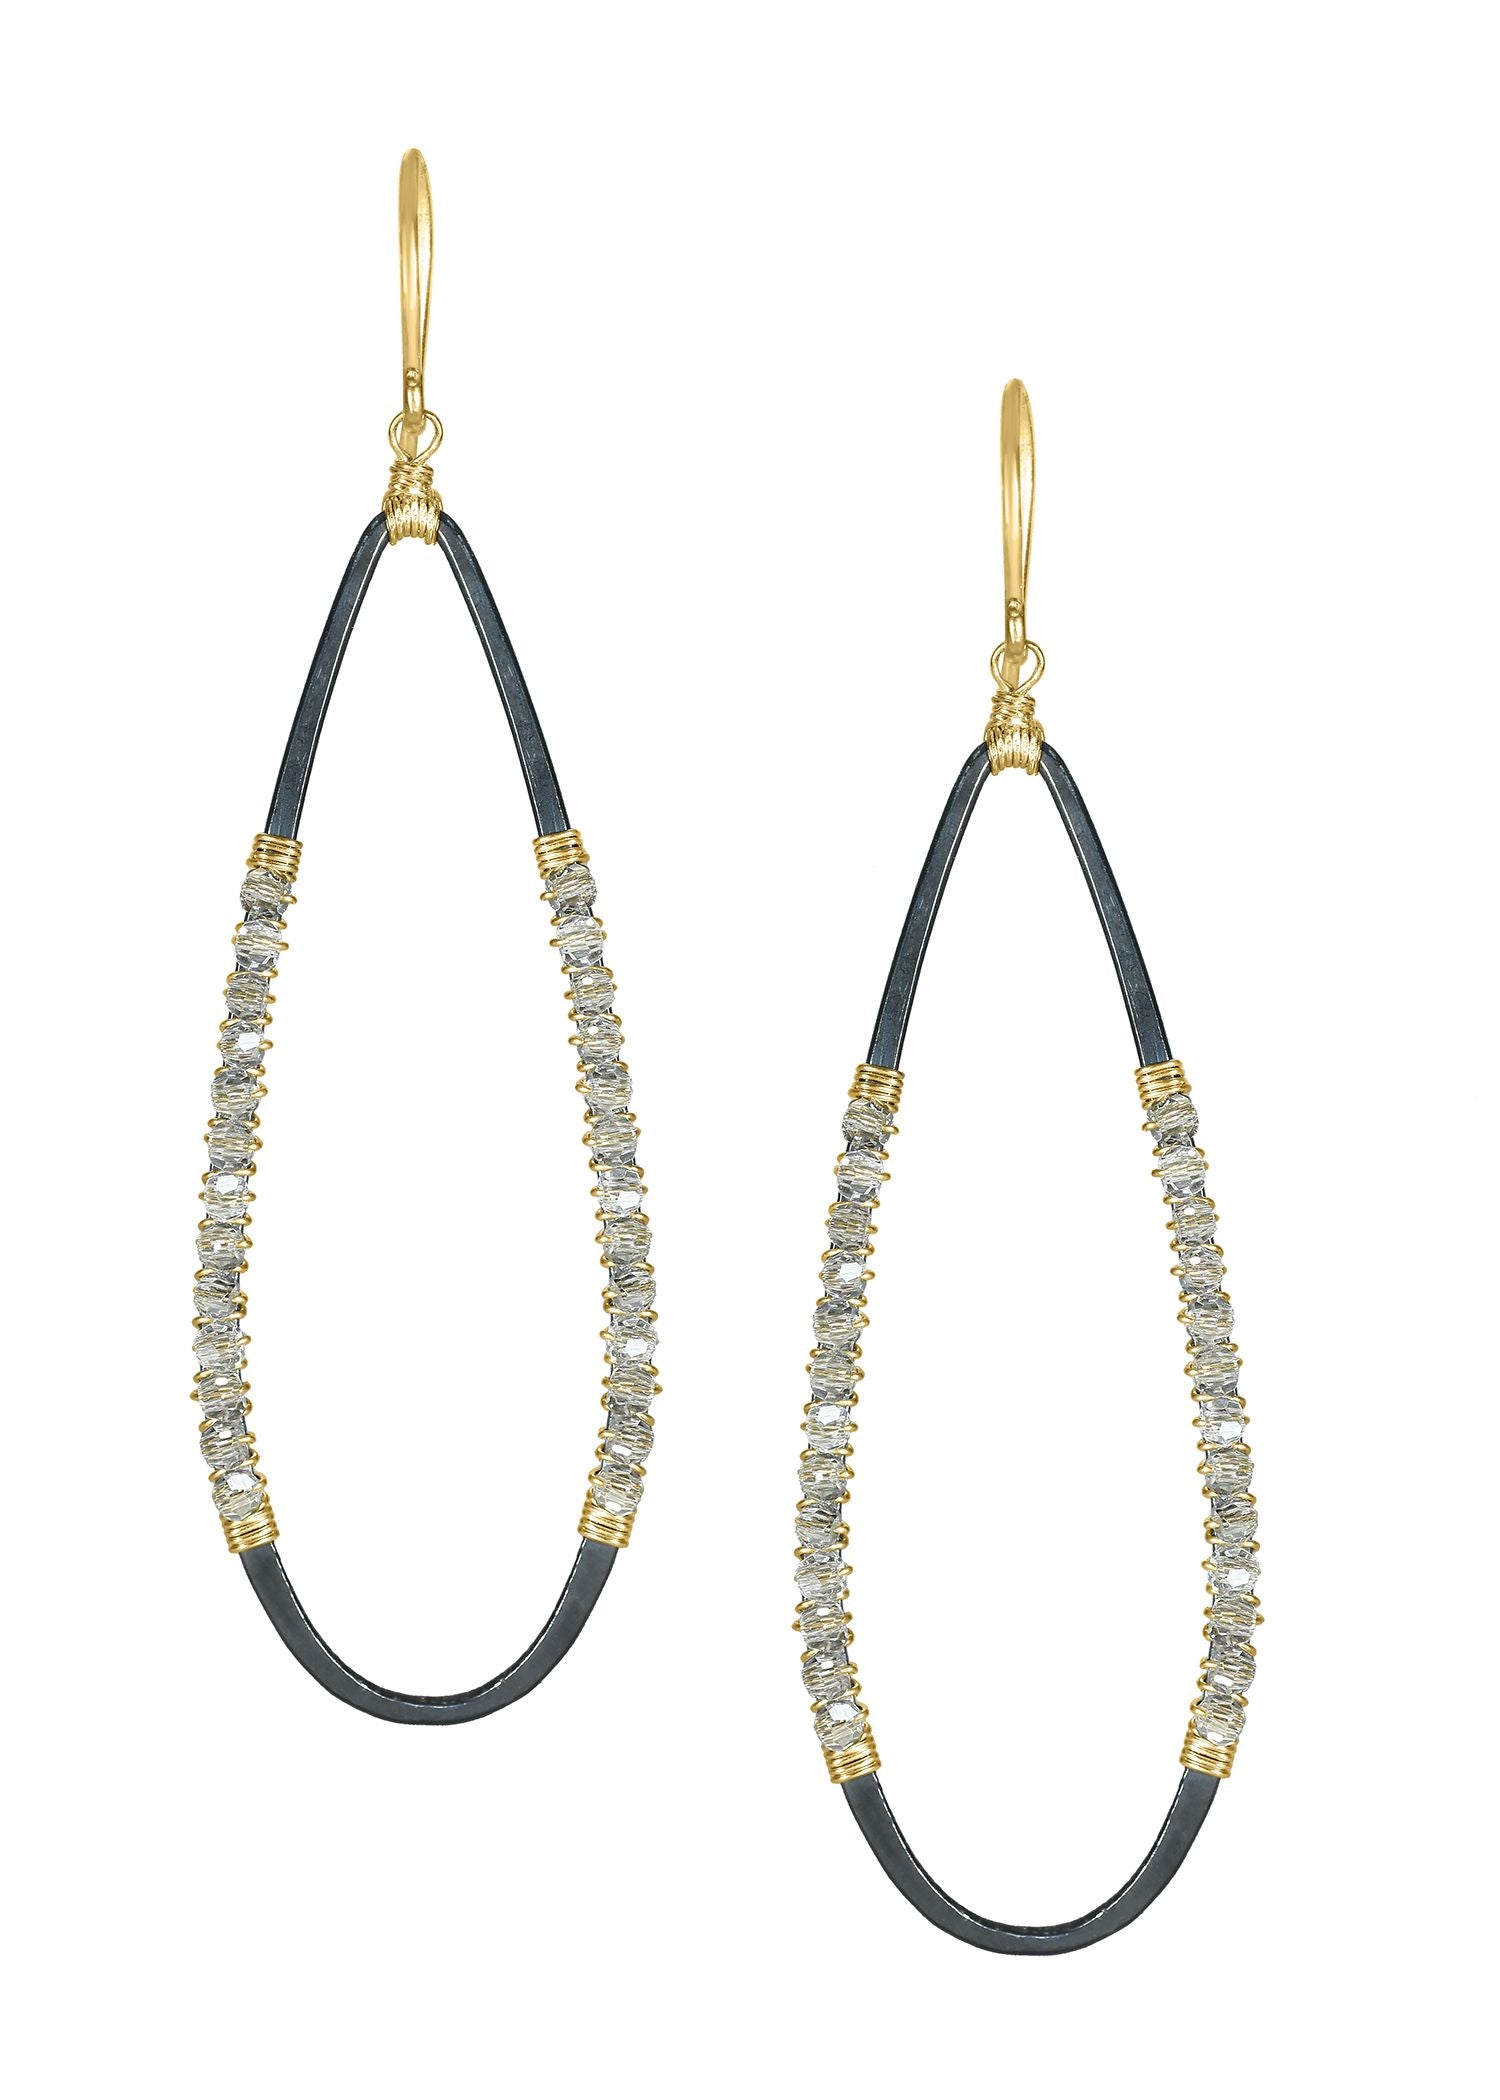 Crystal 14k gold fill Blackened sterling silver Mixed metal Earrings measure 2-3/8" in length (including ear wires) and 11/16" in width Handmade in our Los Angeles studio